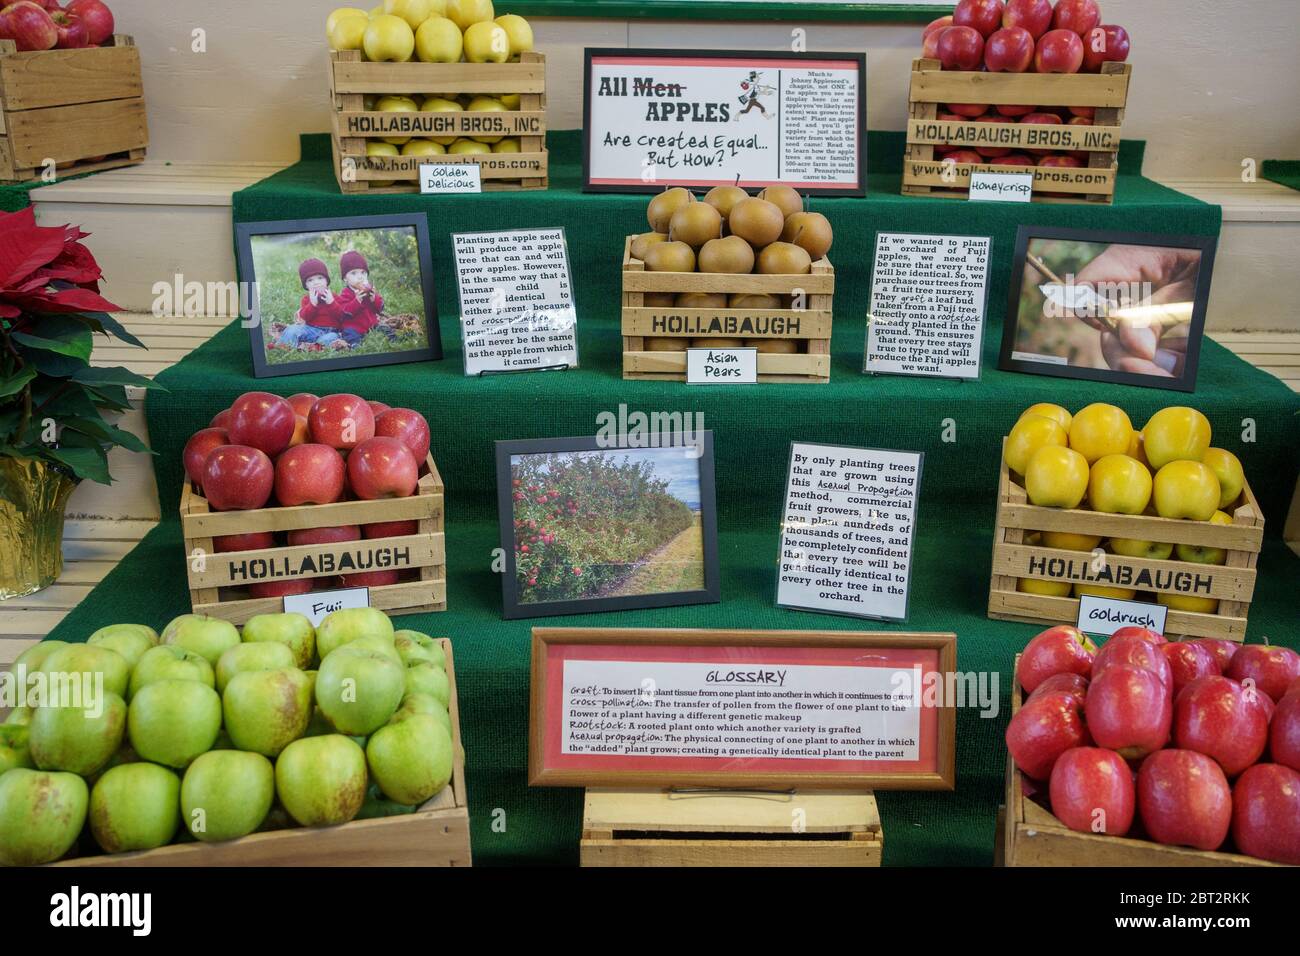 Harrisburg, PA / USA - January 6, 2020: Fresh apples, one of Pernnsylvania’s large agricultural crops, are on display at the annual PA Farm Show. Stock Photo